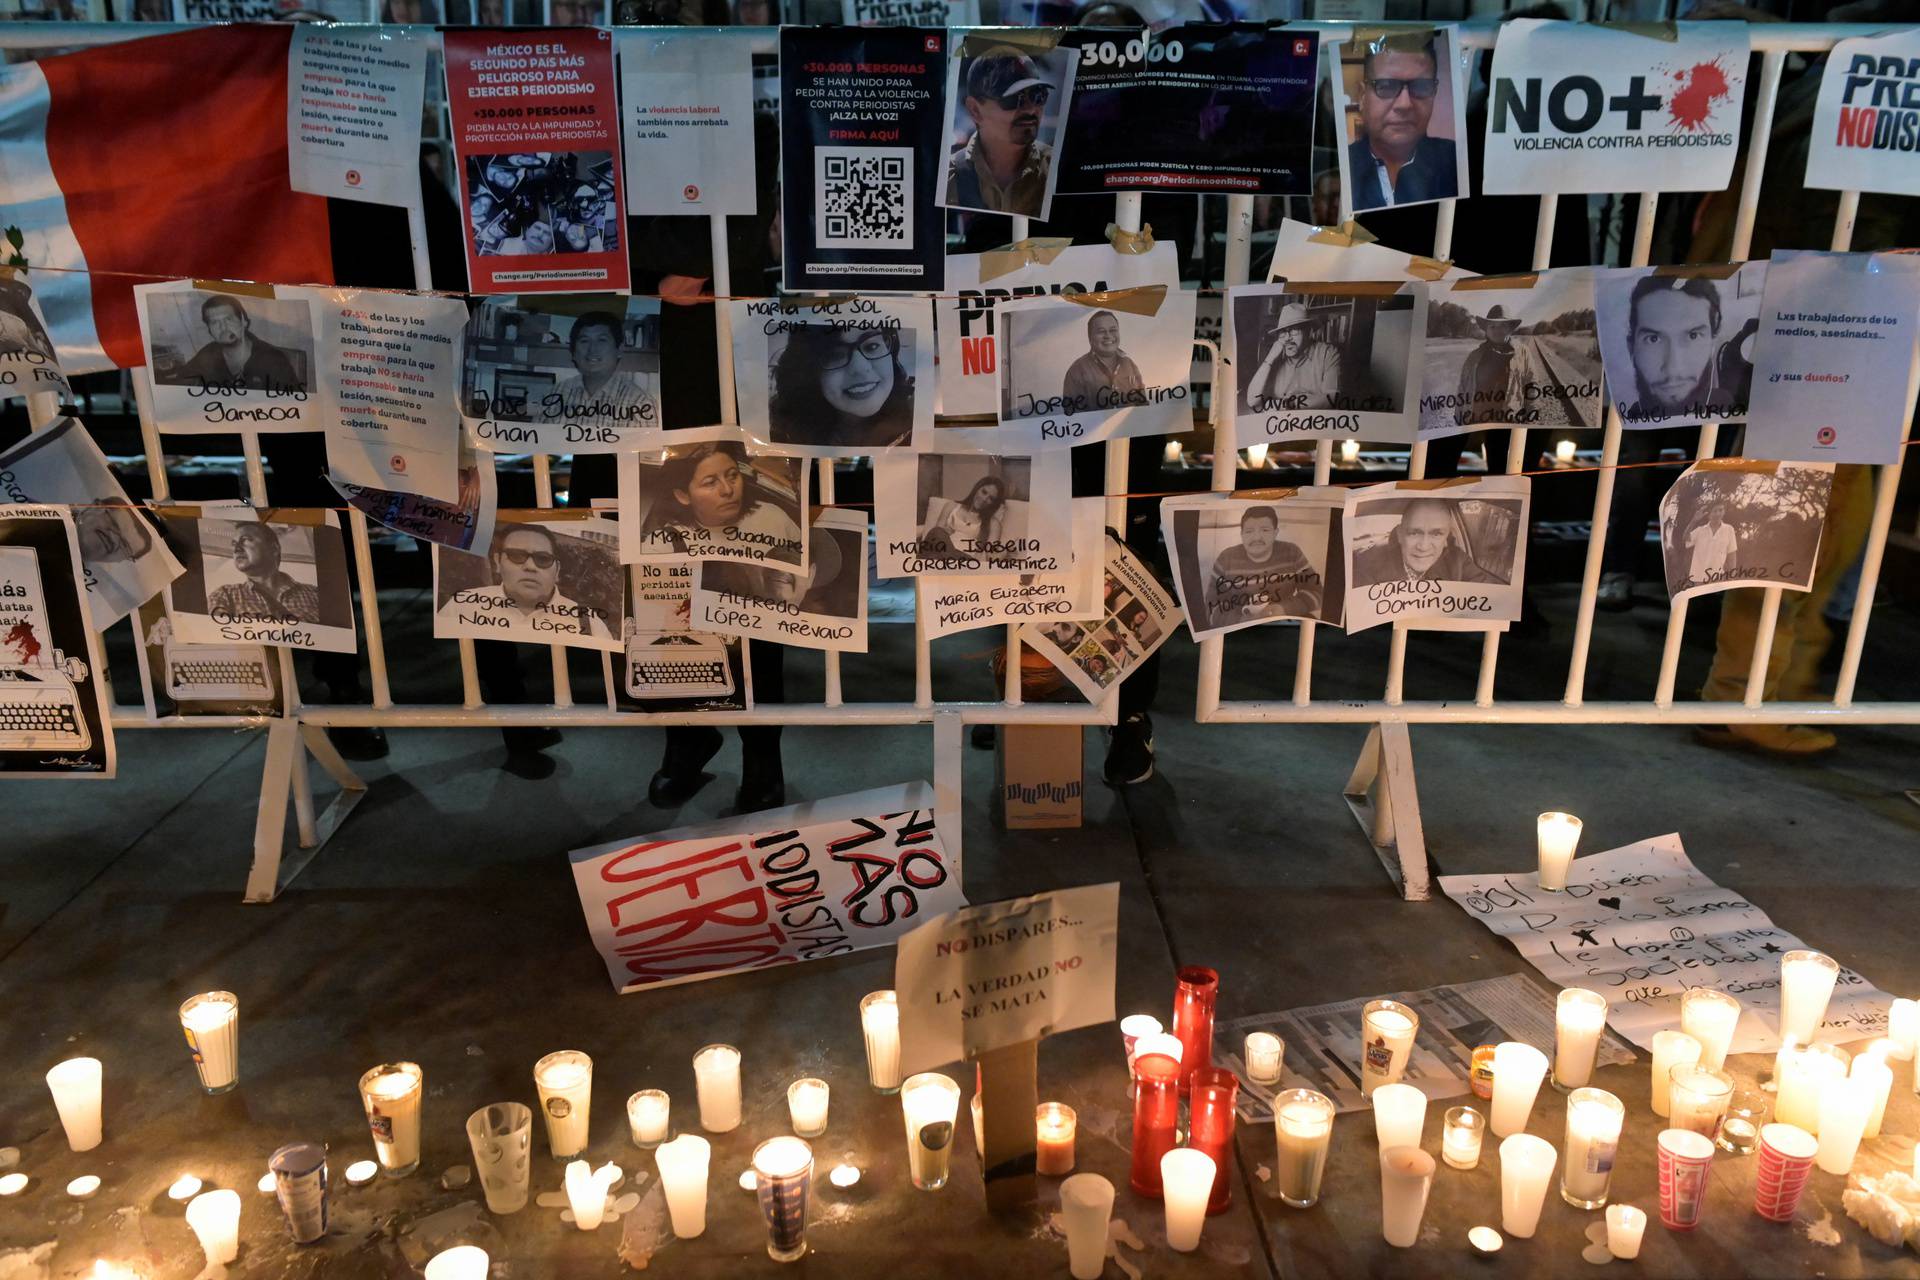 Vigil to protest against the killing of journalists in past days, in Mexico City